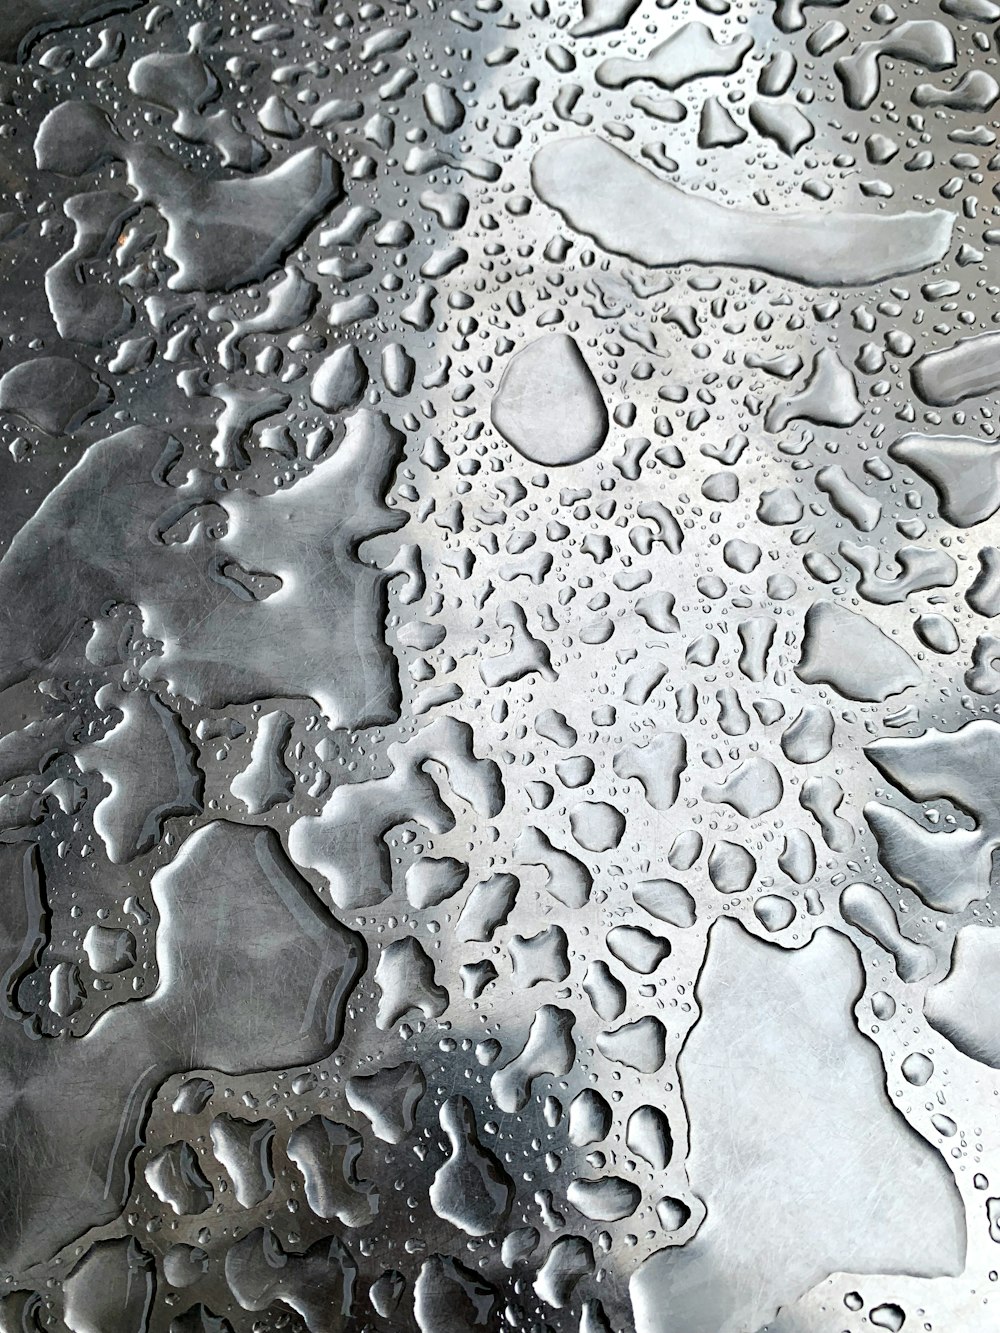 a close up of water droplets on a metal surface